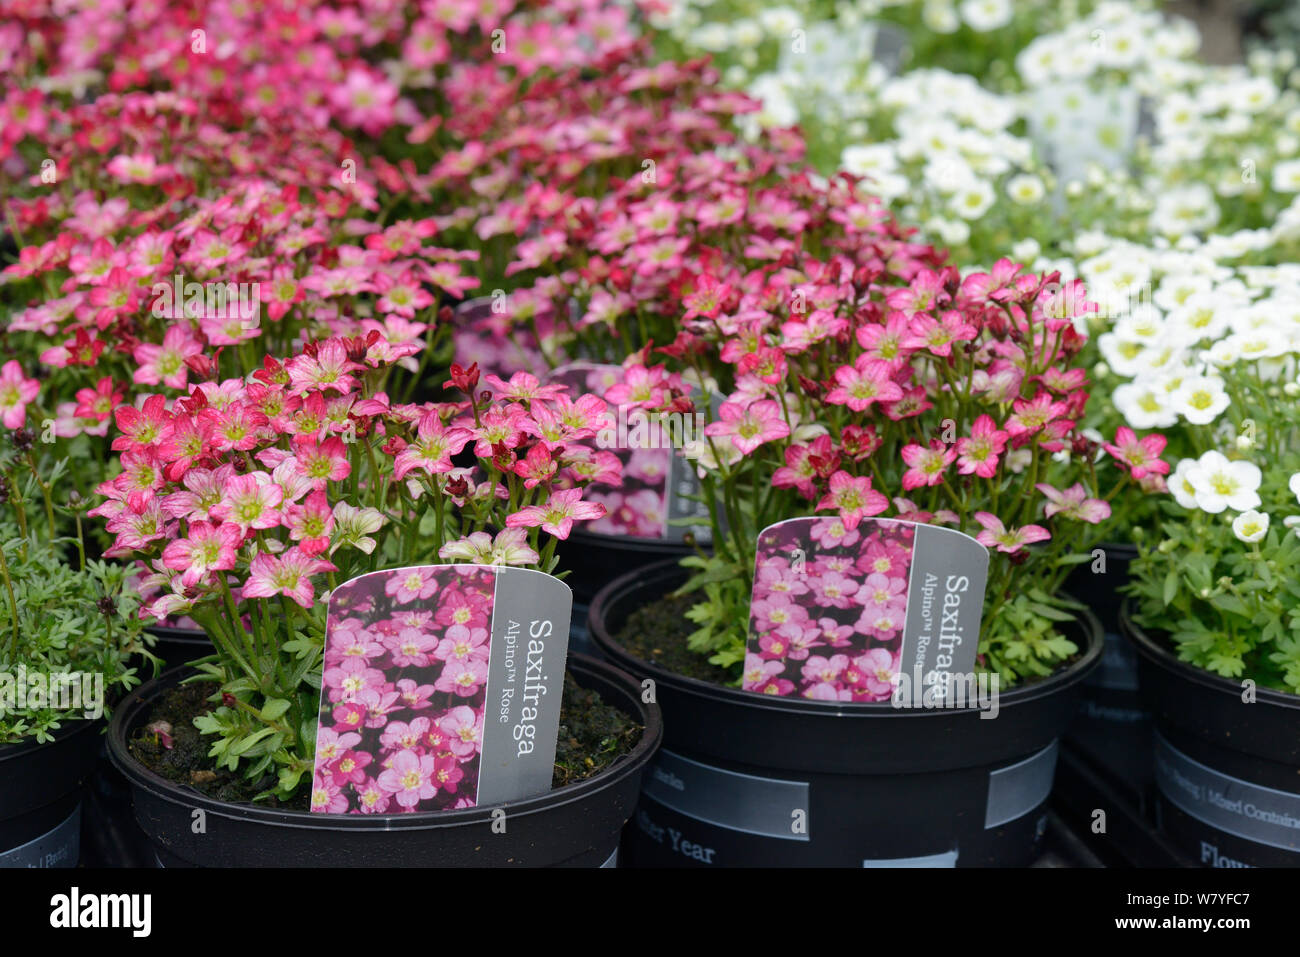 Alpine Rose saxifrage (Saxifraga arendsii) in flower pots at a Garden centre, Wiltshire, UK. Stock Photo